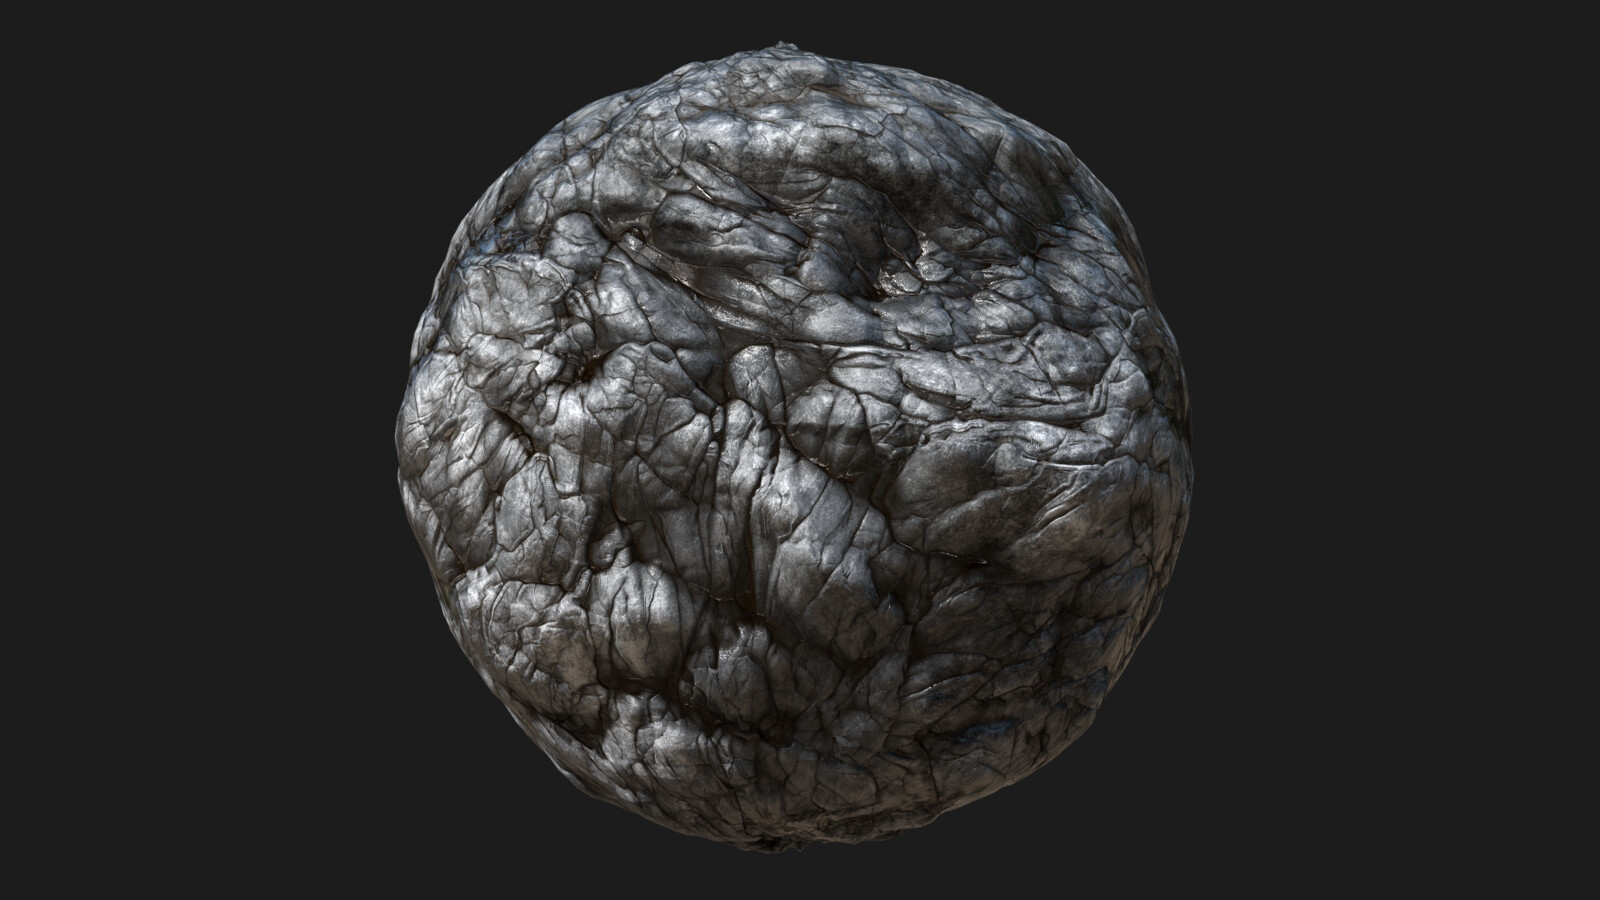 MDL material, custom parameters approximating granite, rendered in Substance Designer Iray